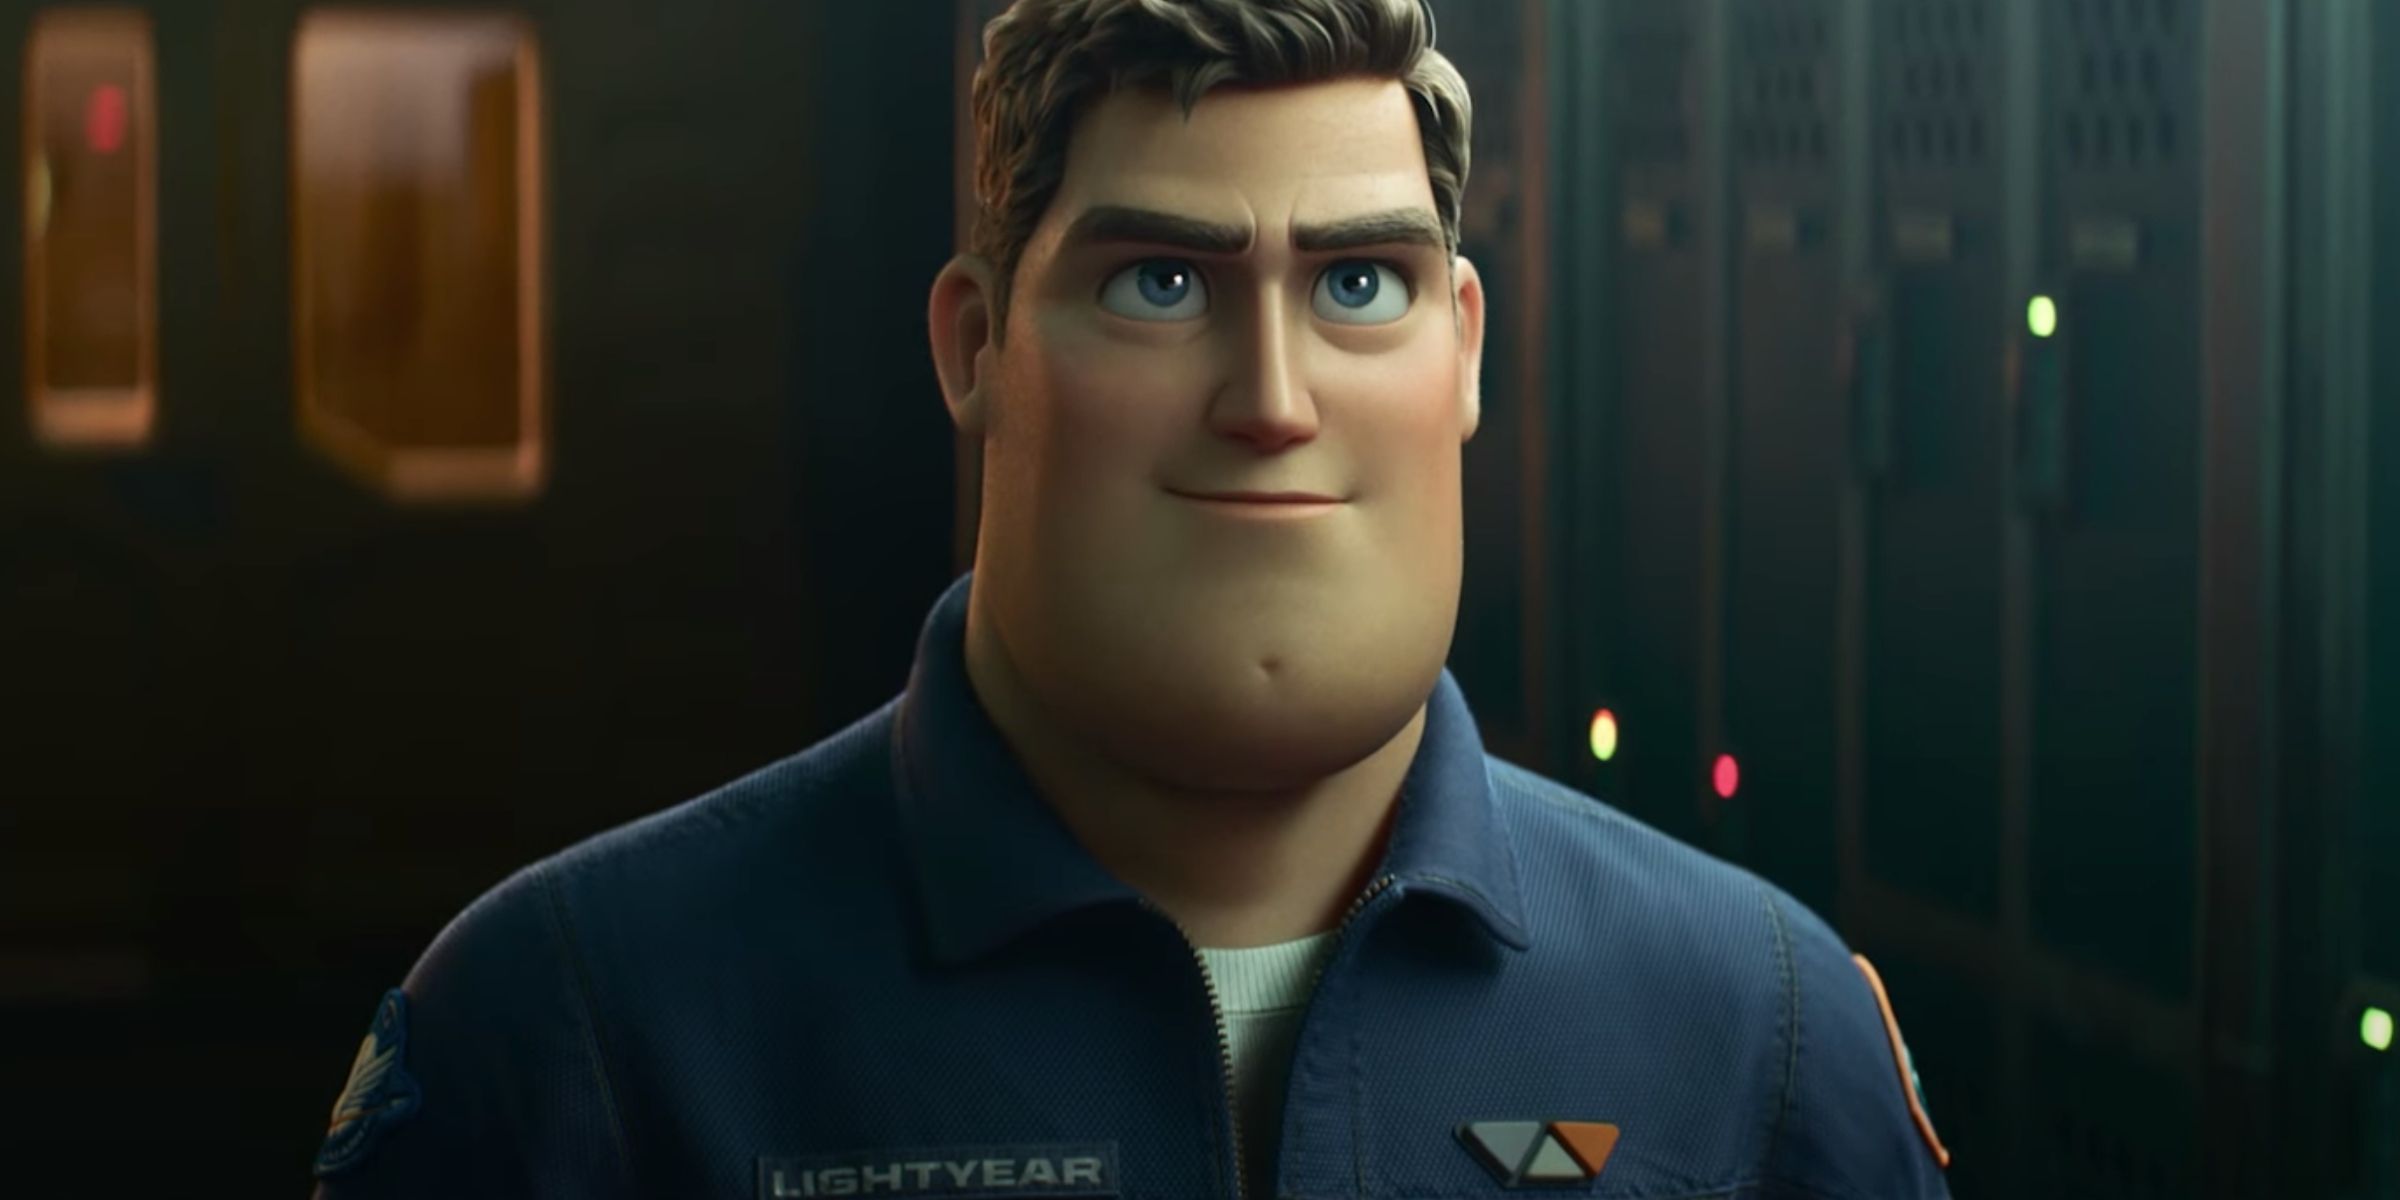 Buzz looks at the camera in his civilian clothes in Lightyear.